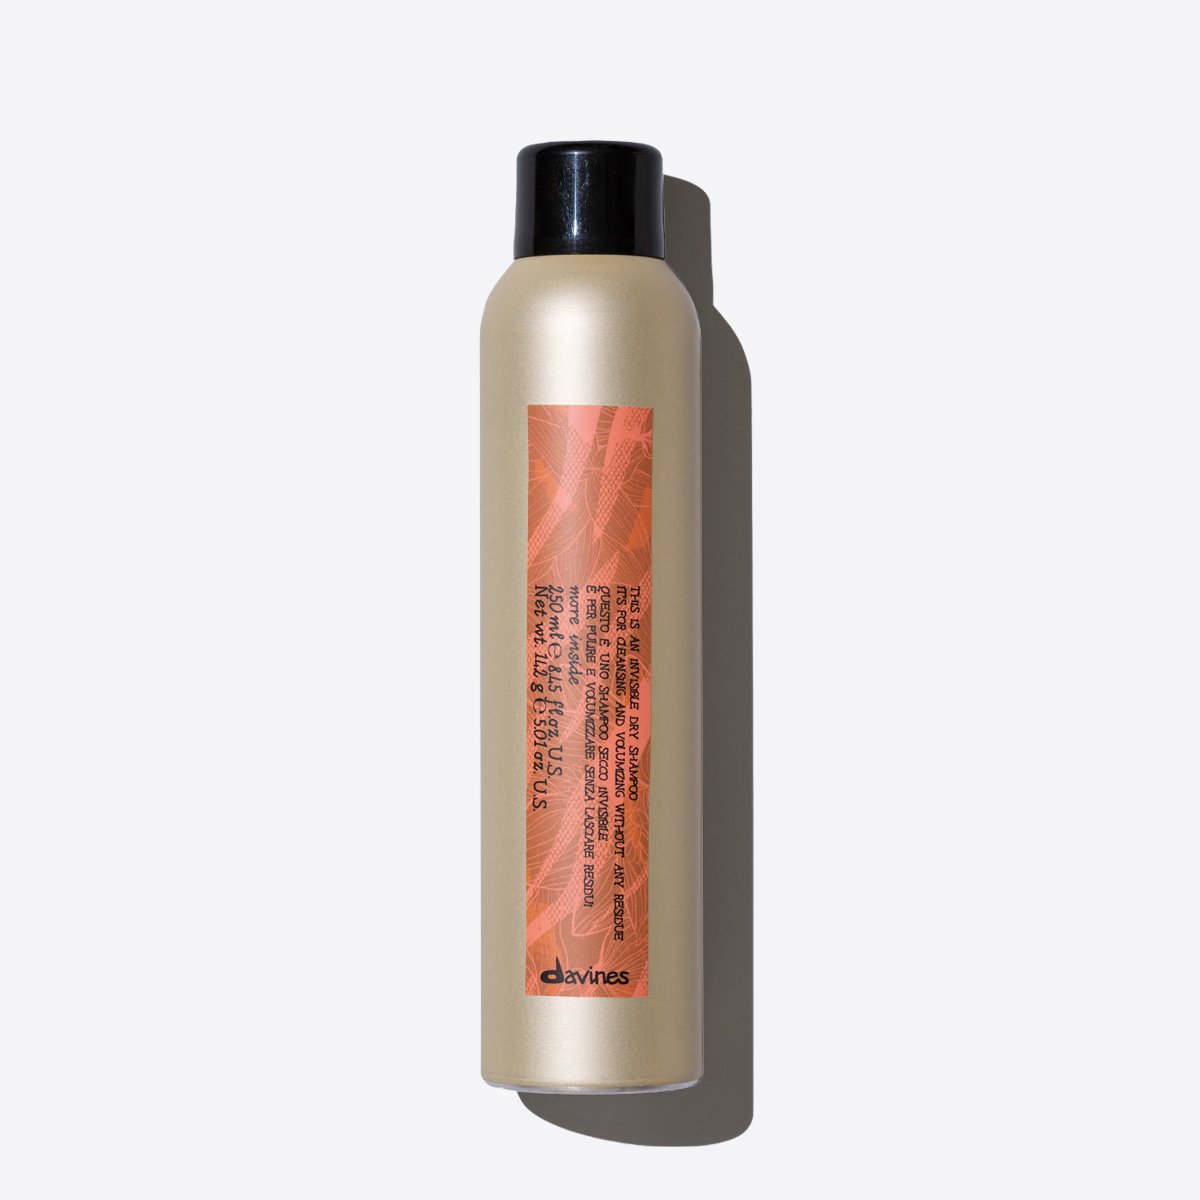 More Inside: Invisible Dry Shampoo